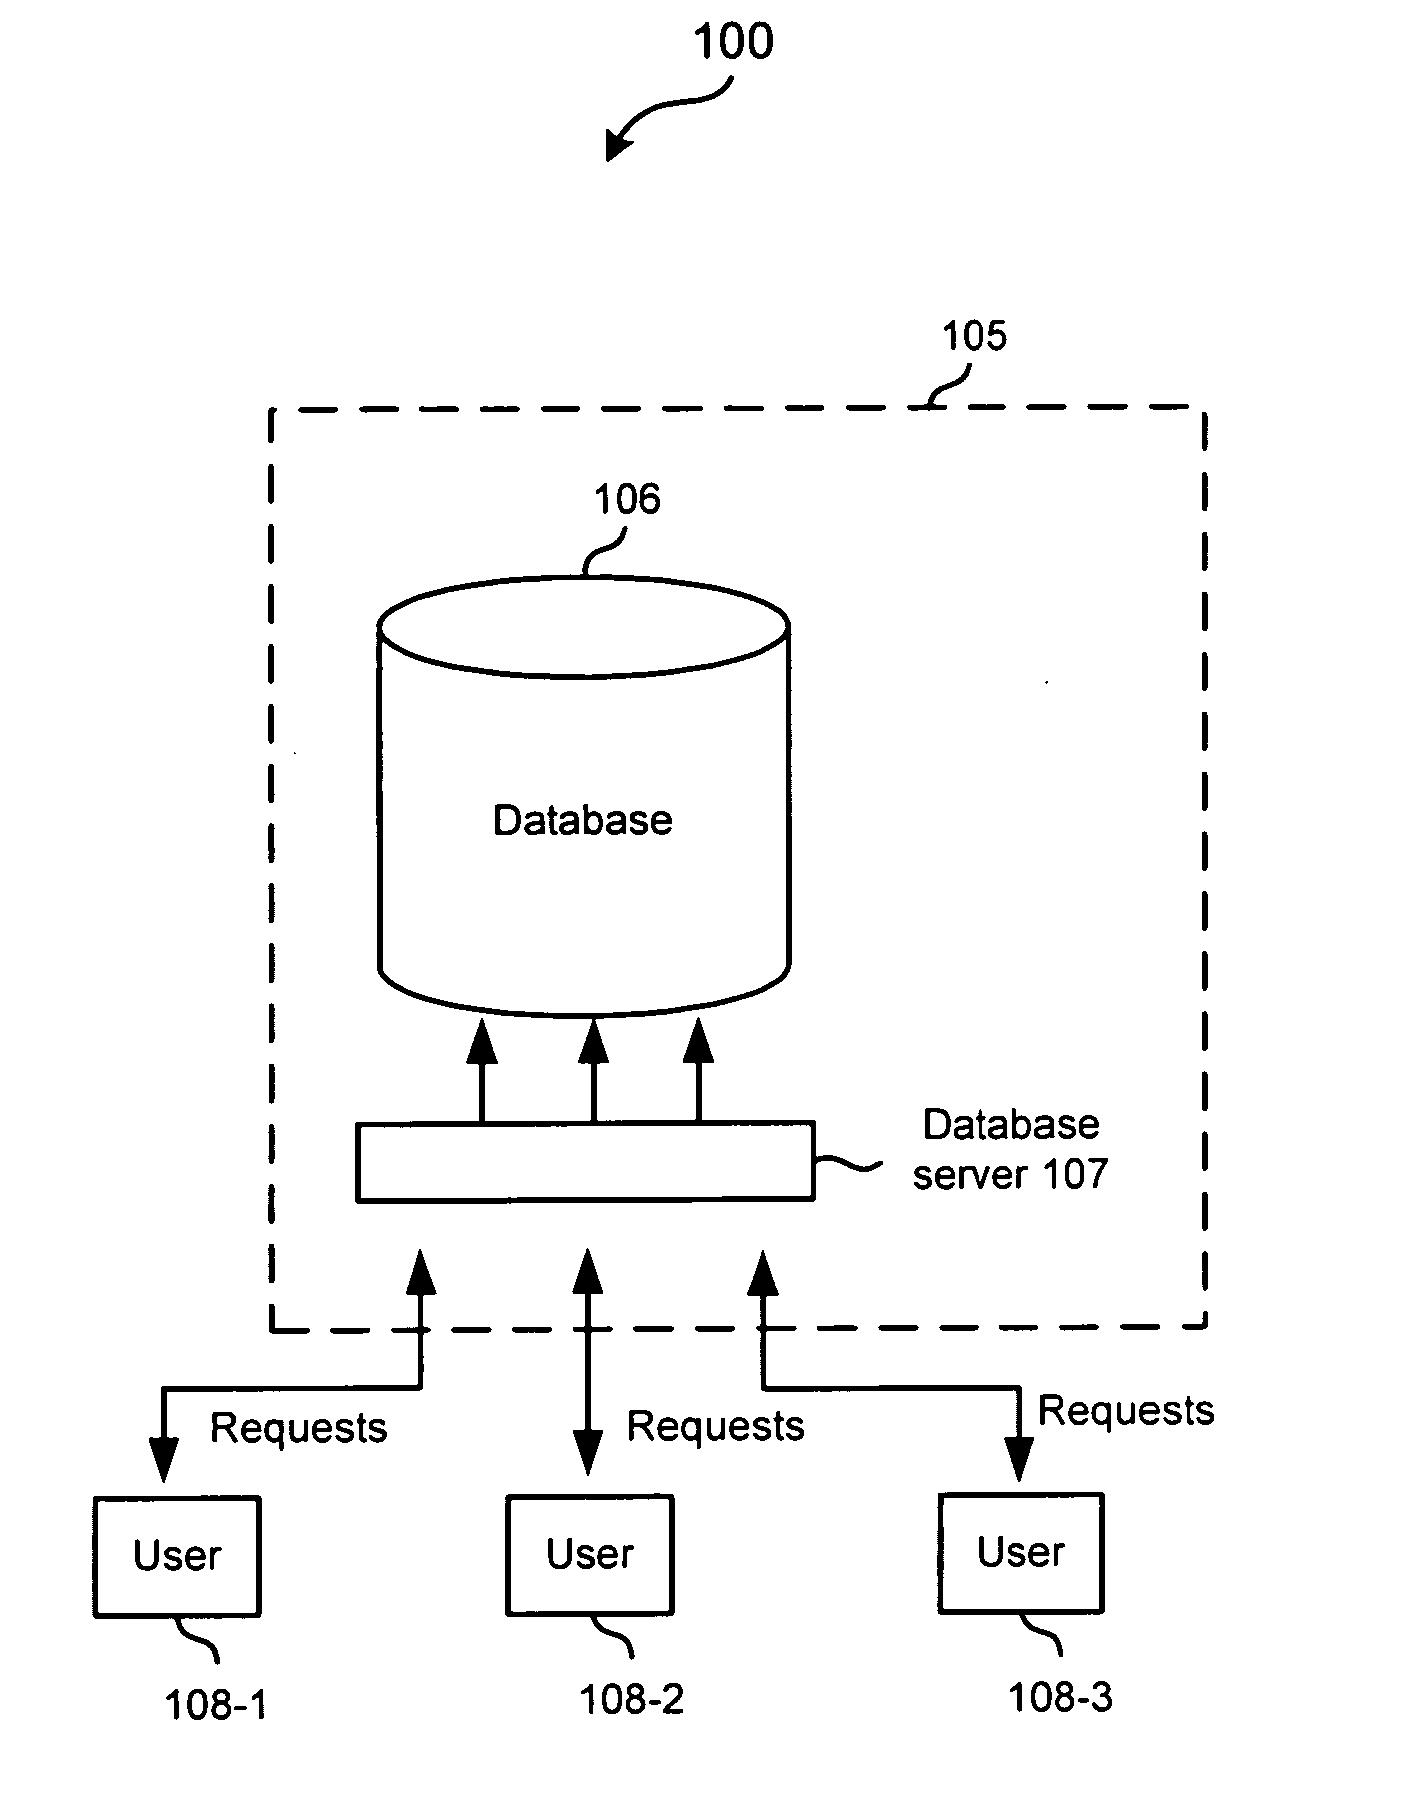 Capturing session activity as in-memory snapshots using a time-based sampling technique within a database for performance tuning and problem diagnosis